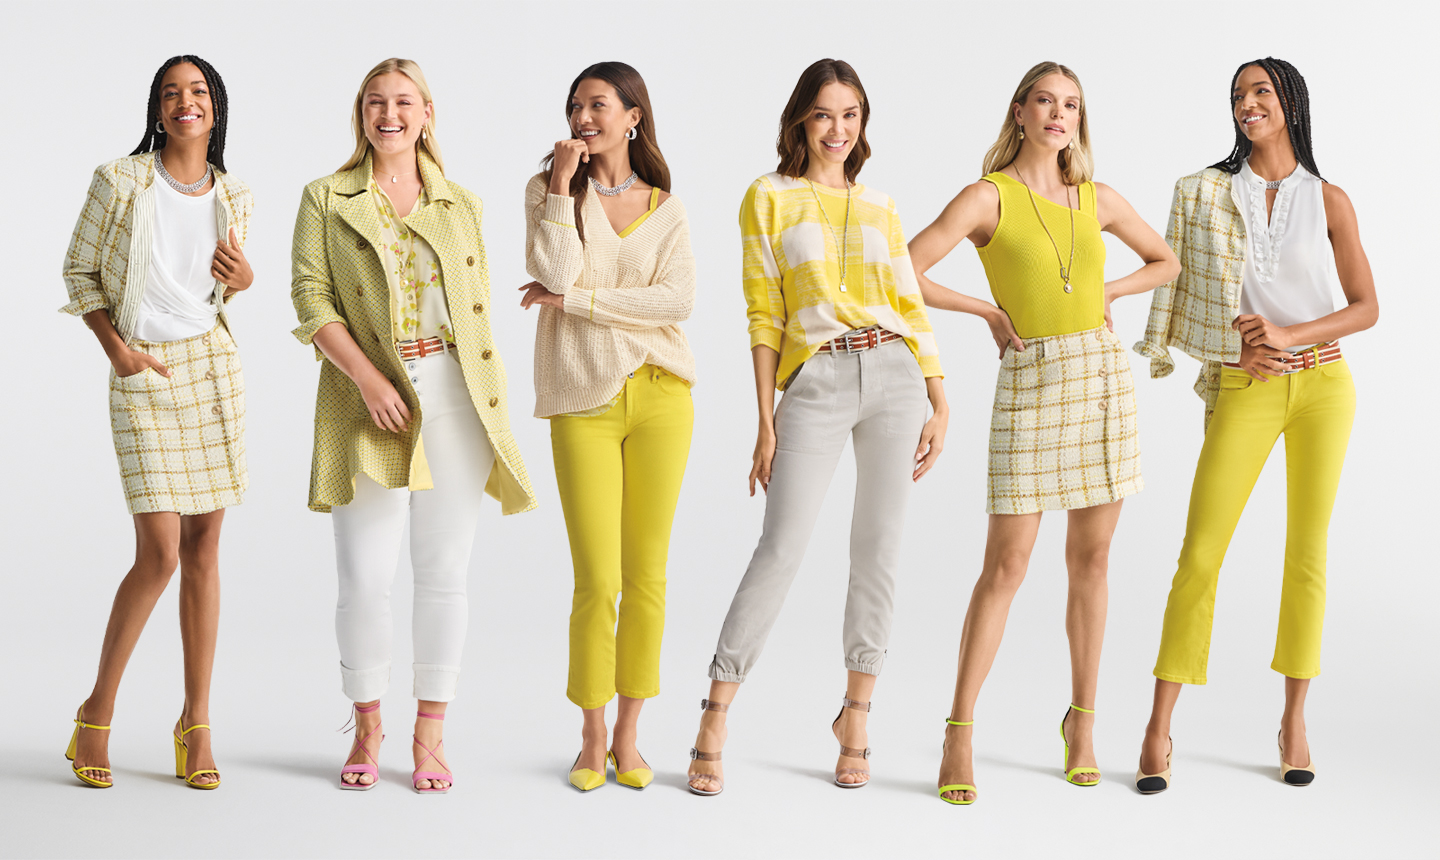 SUNday fun day: how to wear yellow